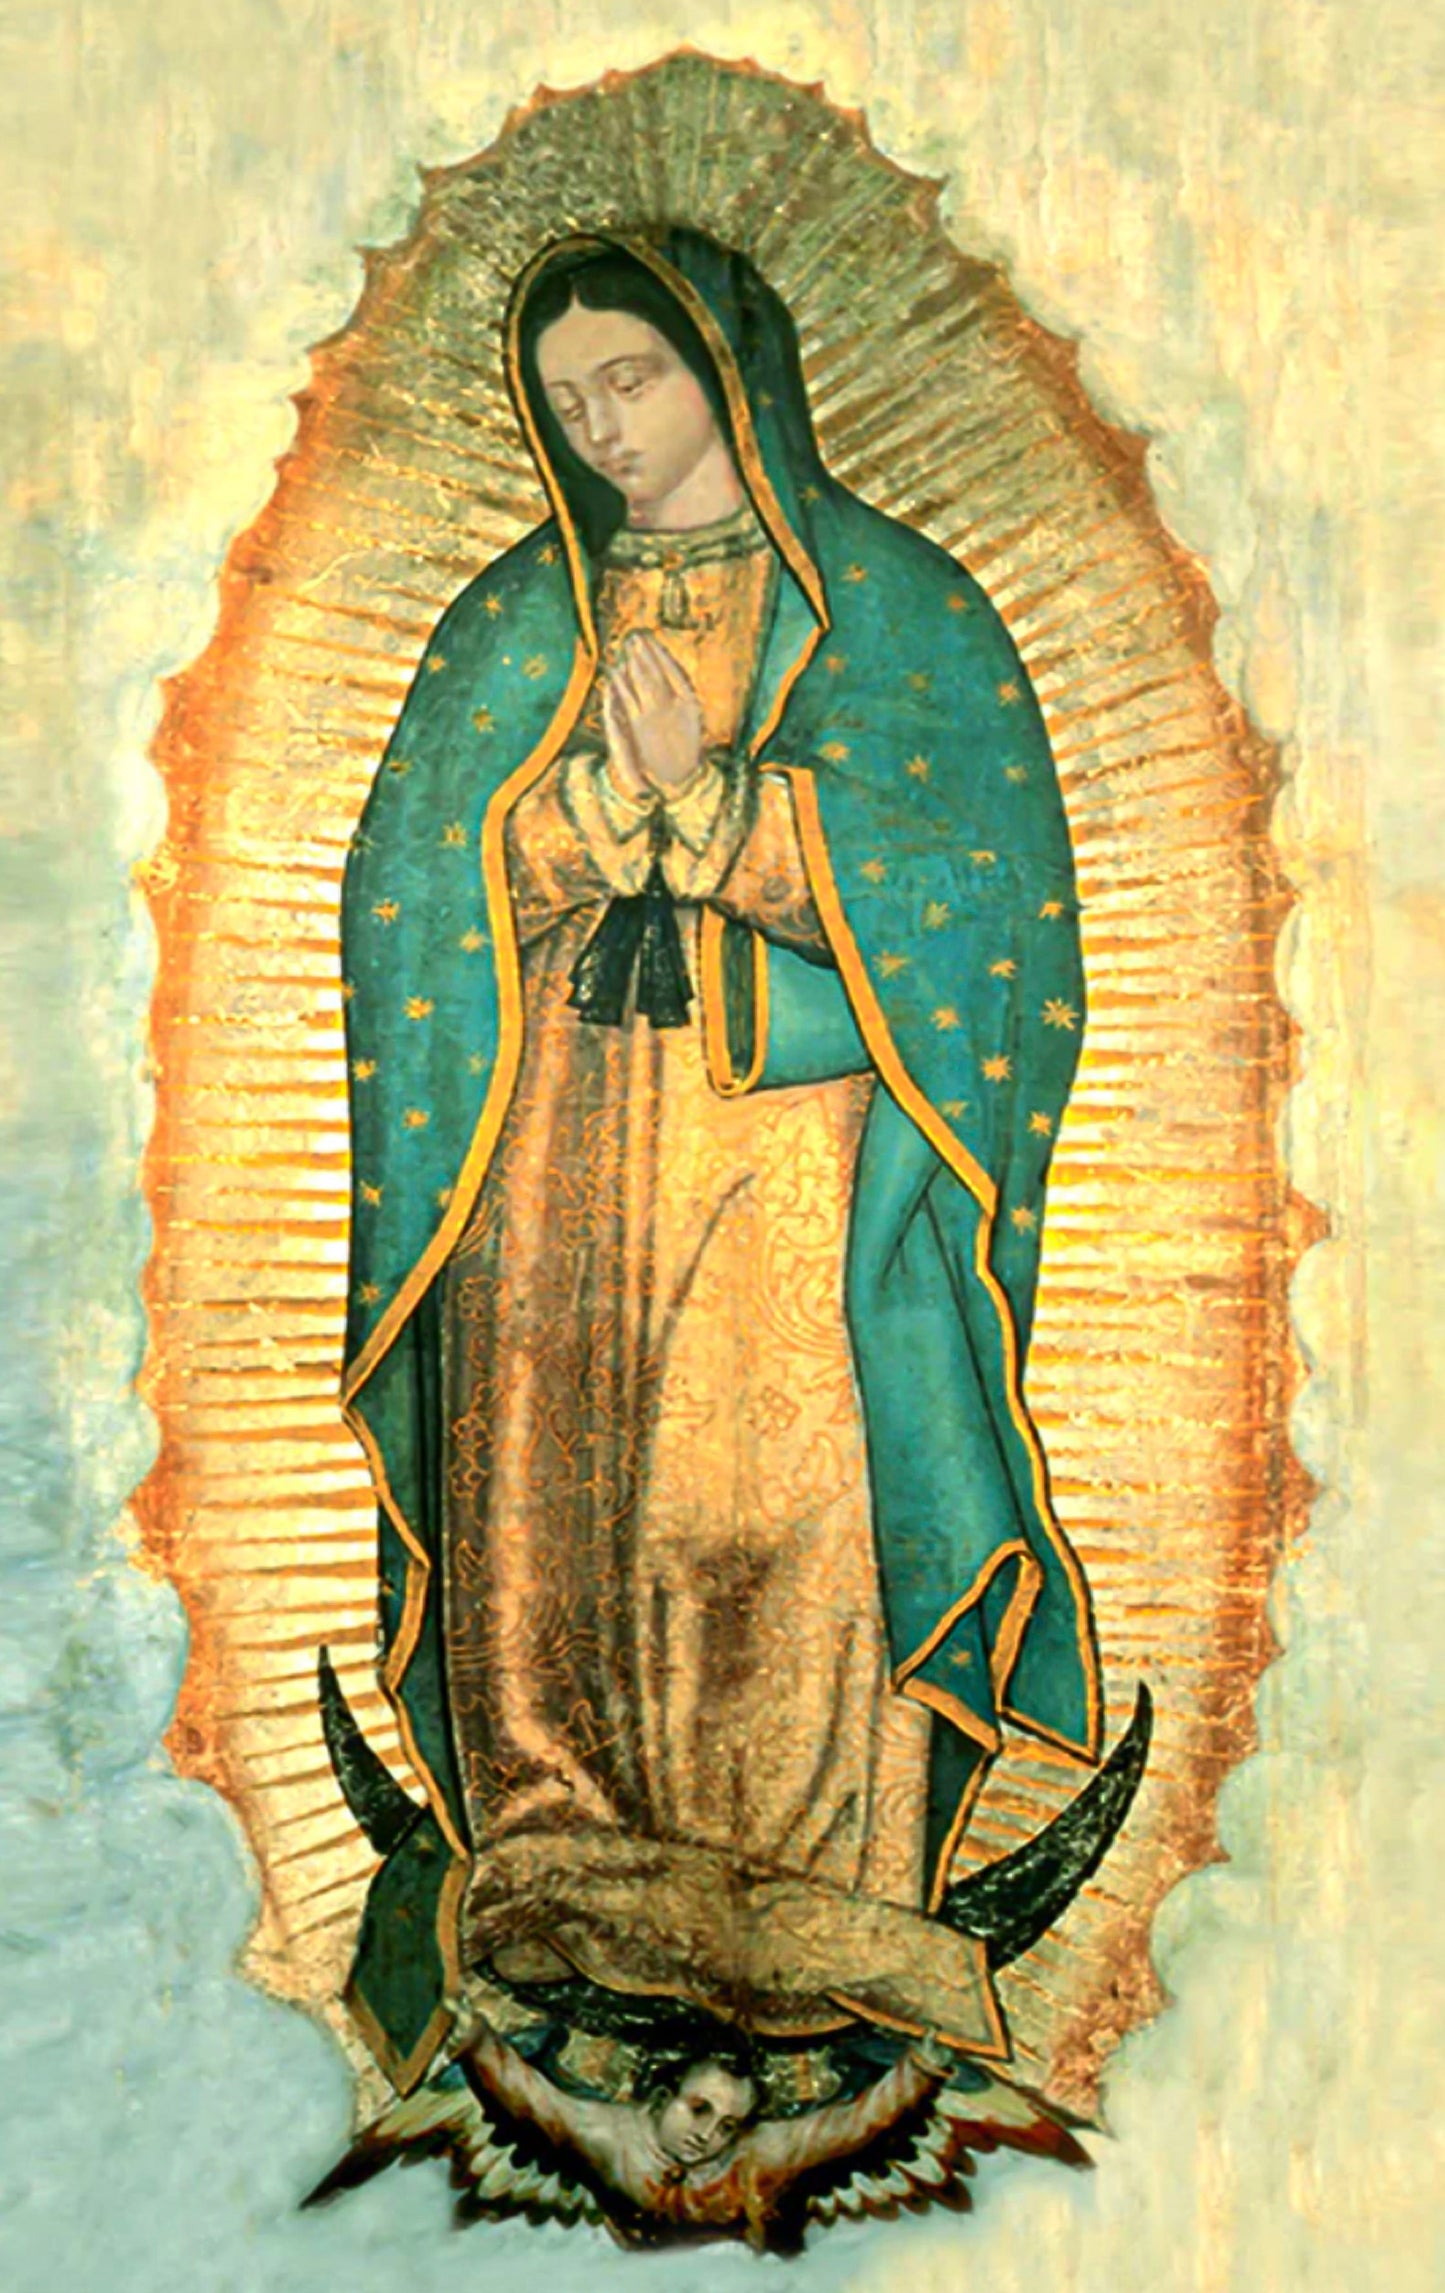 Our Lady of Guadalupe Save $30 - Same Size/Frame as Vilnius